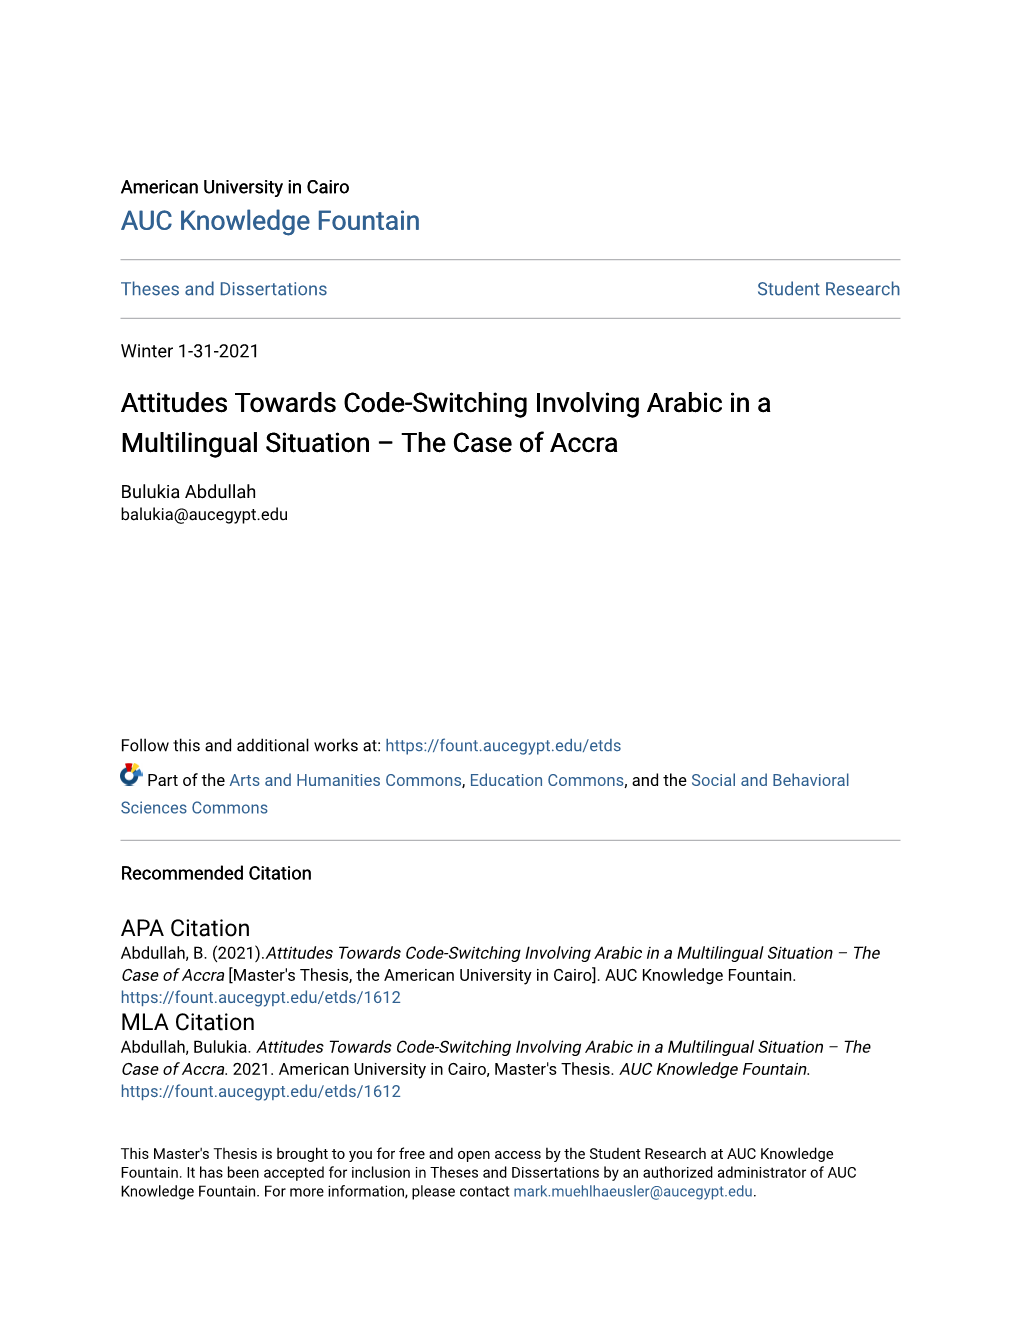 Attitudes Towards Code-Switching Involving Arabic in a Multilingual Situation – the Case of Accra